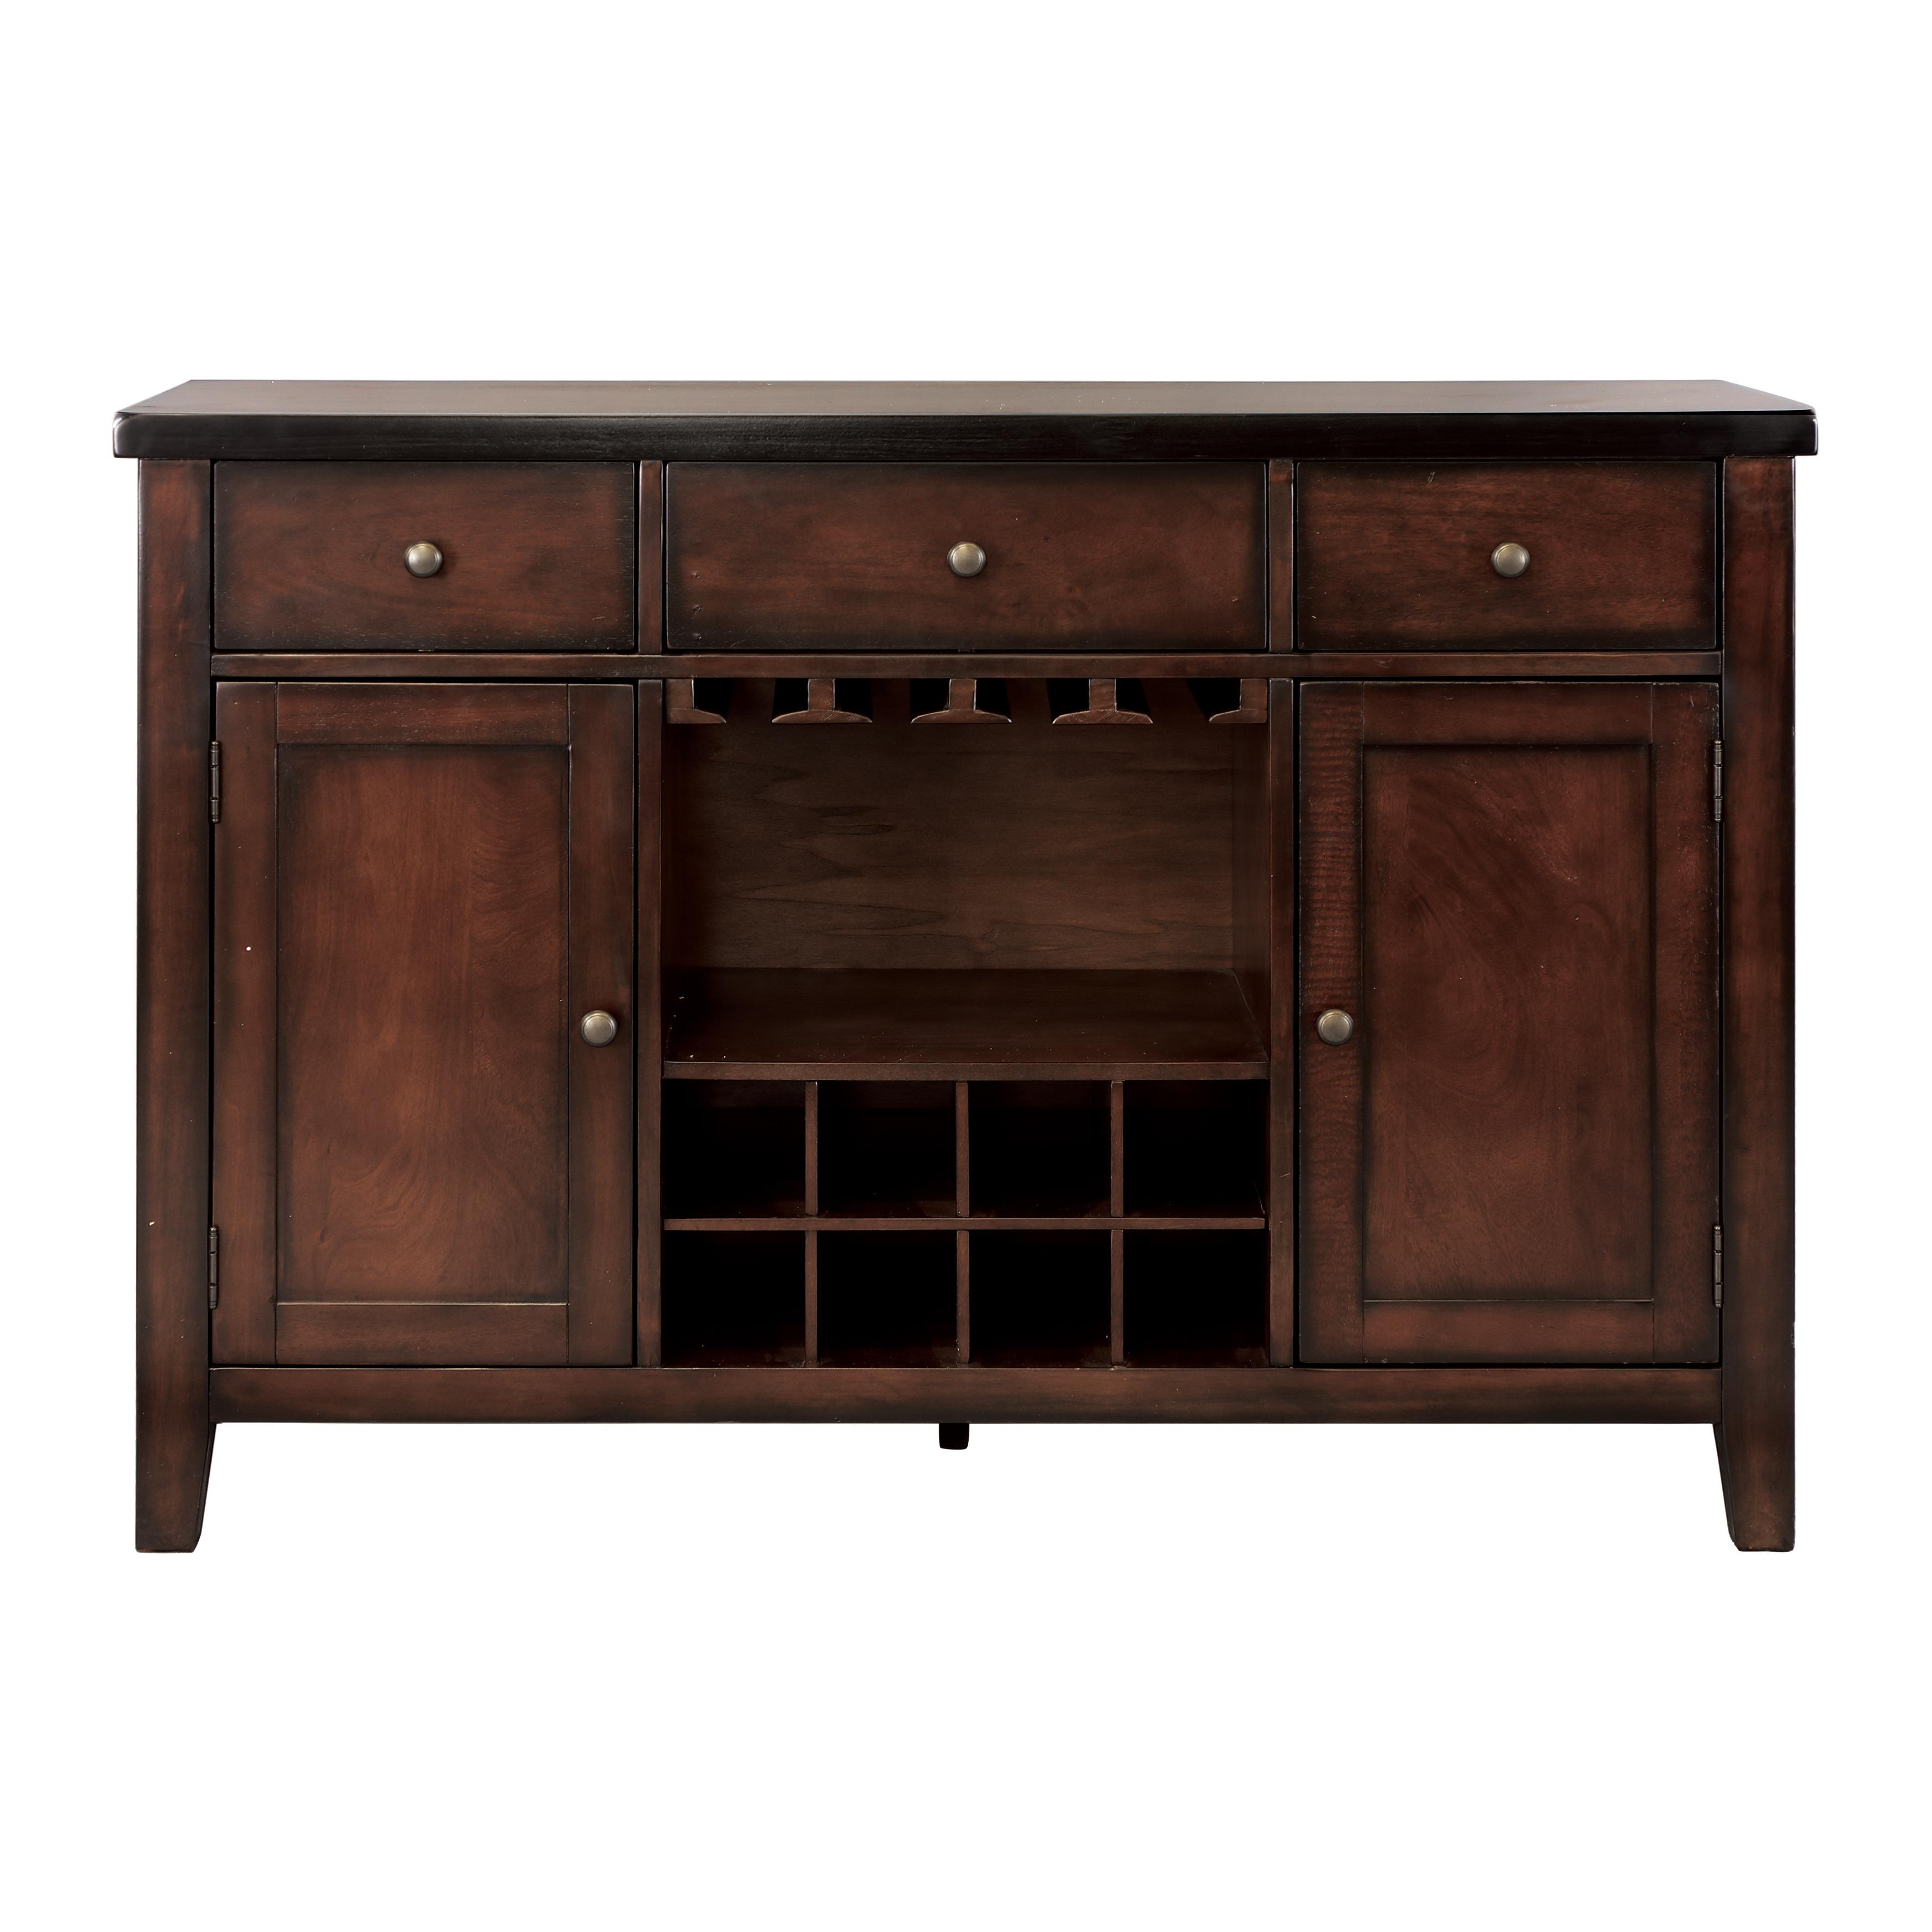 Transitional Server Mantello Collection Server 5547-40-S 5547-40-S in Cherry 